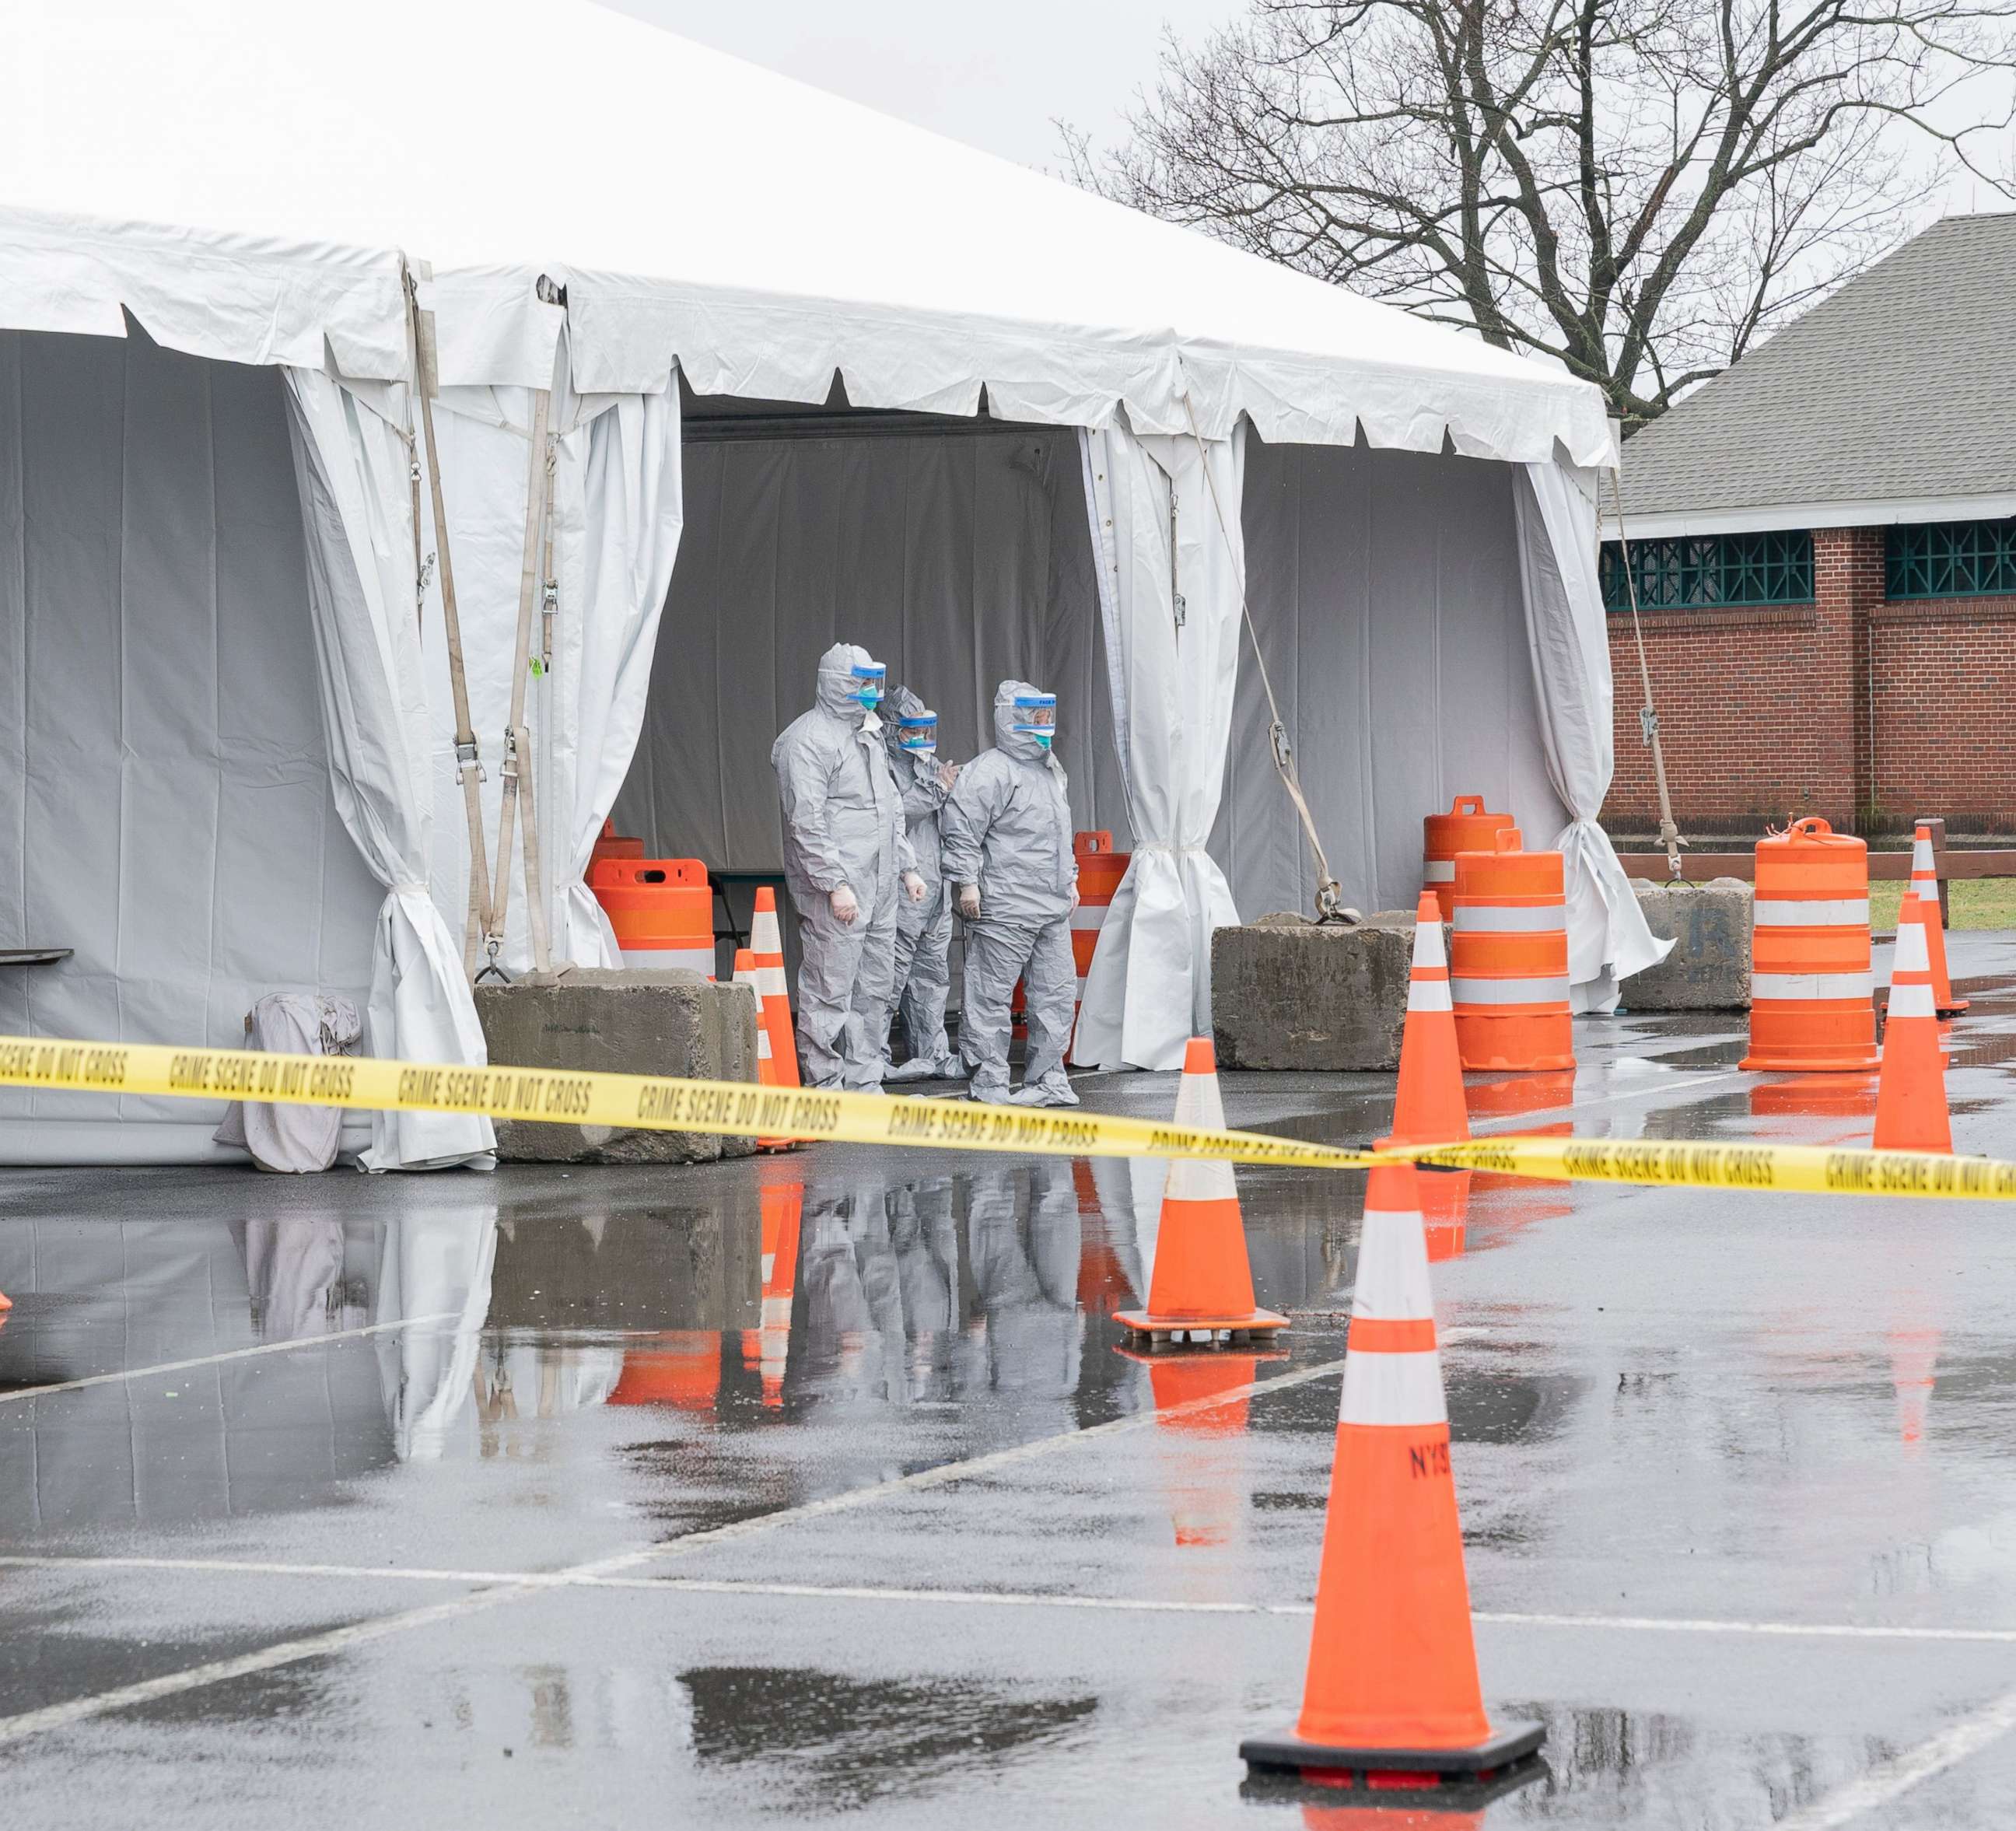 PHOTO:Workers in protective gear operate a drive through coronavirus mobile testing center organized by Northwell hospital at Glen Island Park in New Rochelle, New York, March 13, 2020.